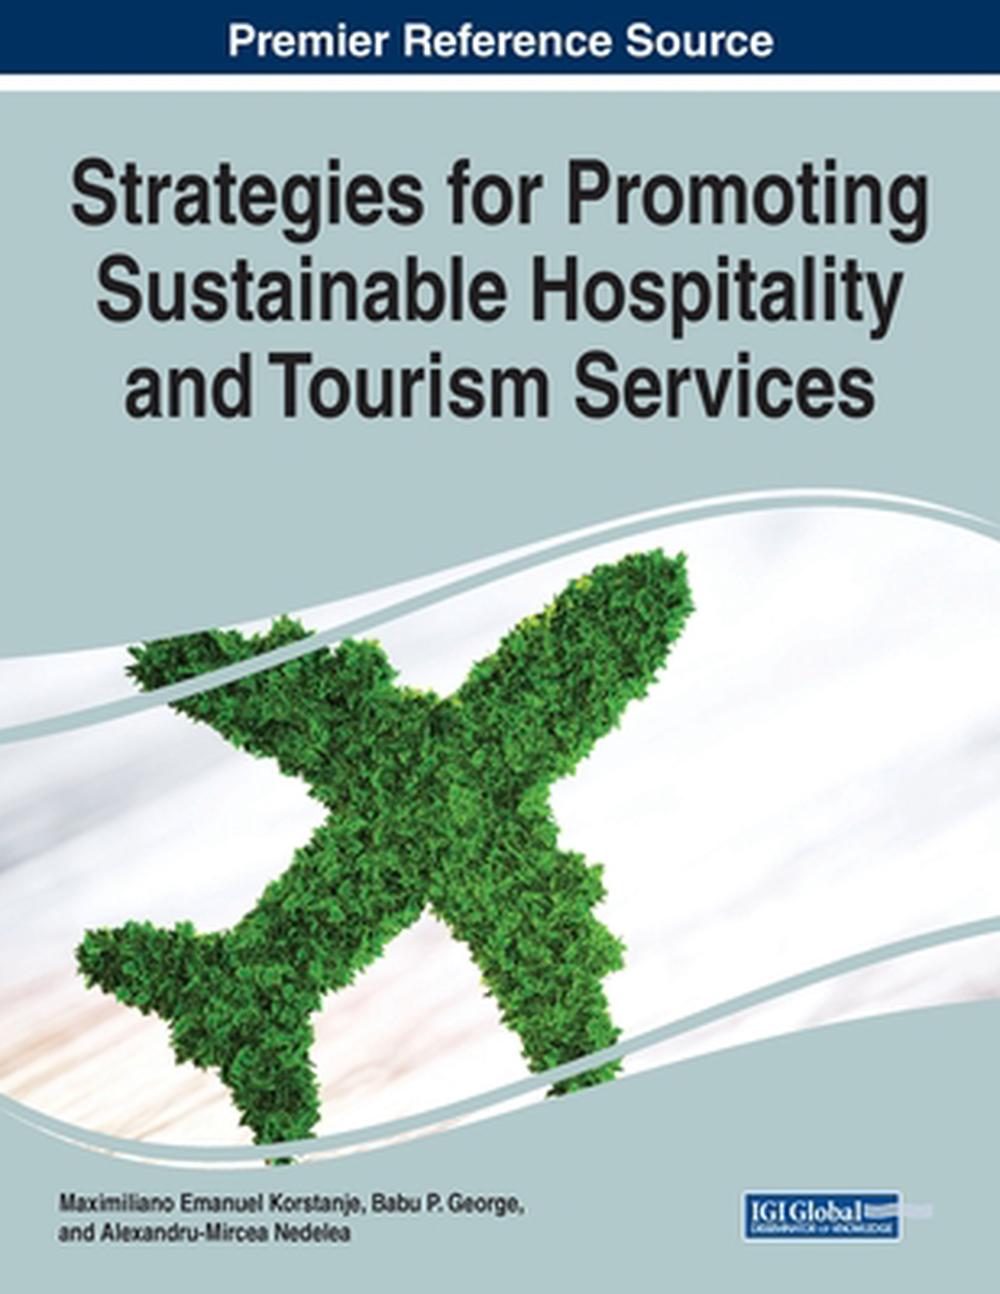 hospitality for sustainable tourism development